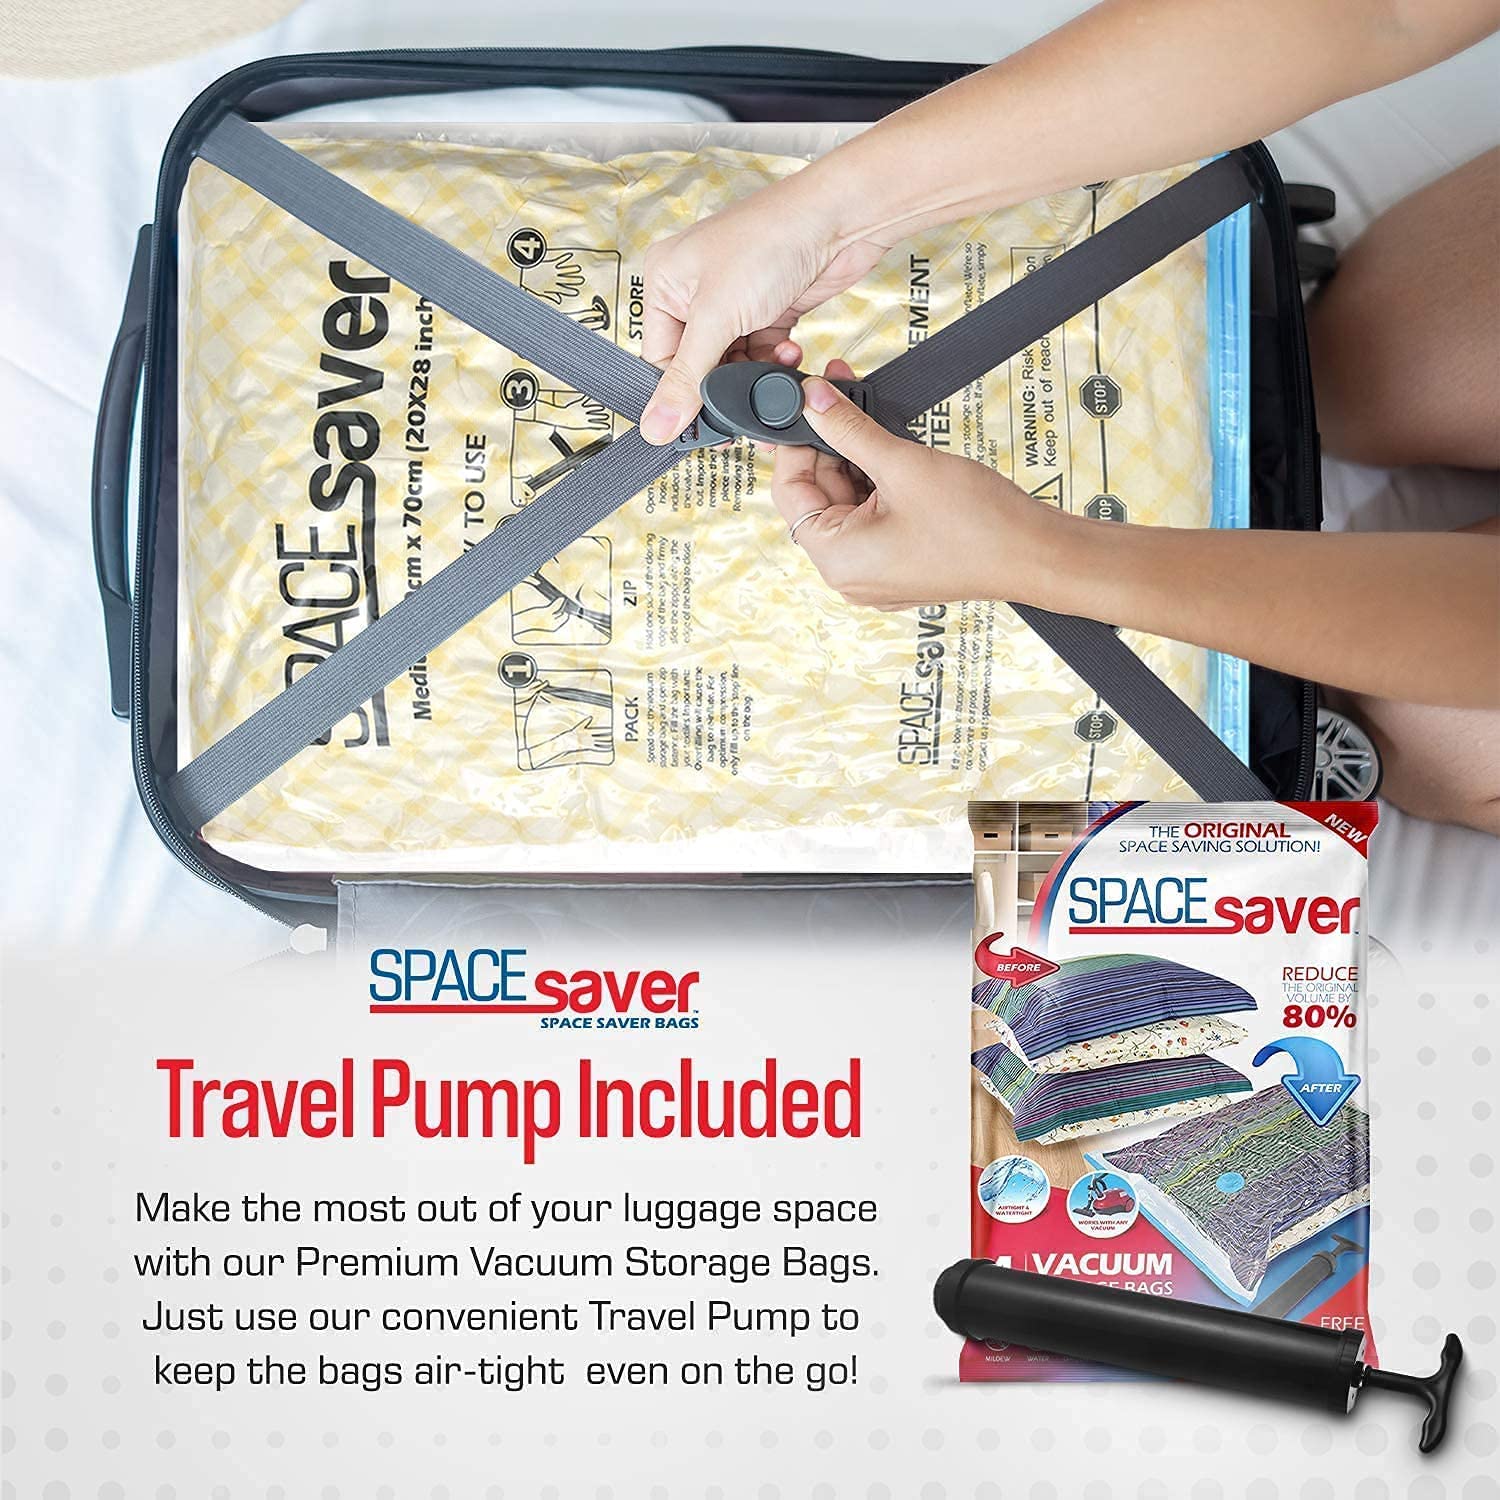 Spacesaver Vacuum Storage Bags (Large 5 Pack) Save 80% on Clothes Storage Space - Vacuum Sealer Bags for Comforters, Blankets, Bedding, Clothing - Compression Seal for Closet Storage. Pump for Travel.